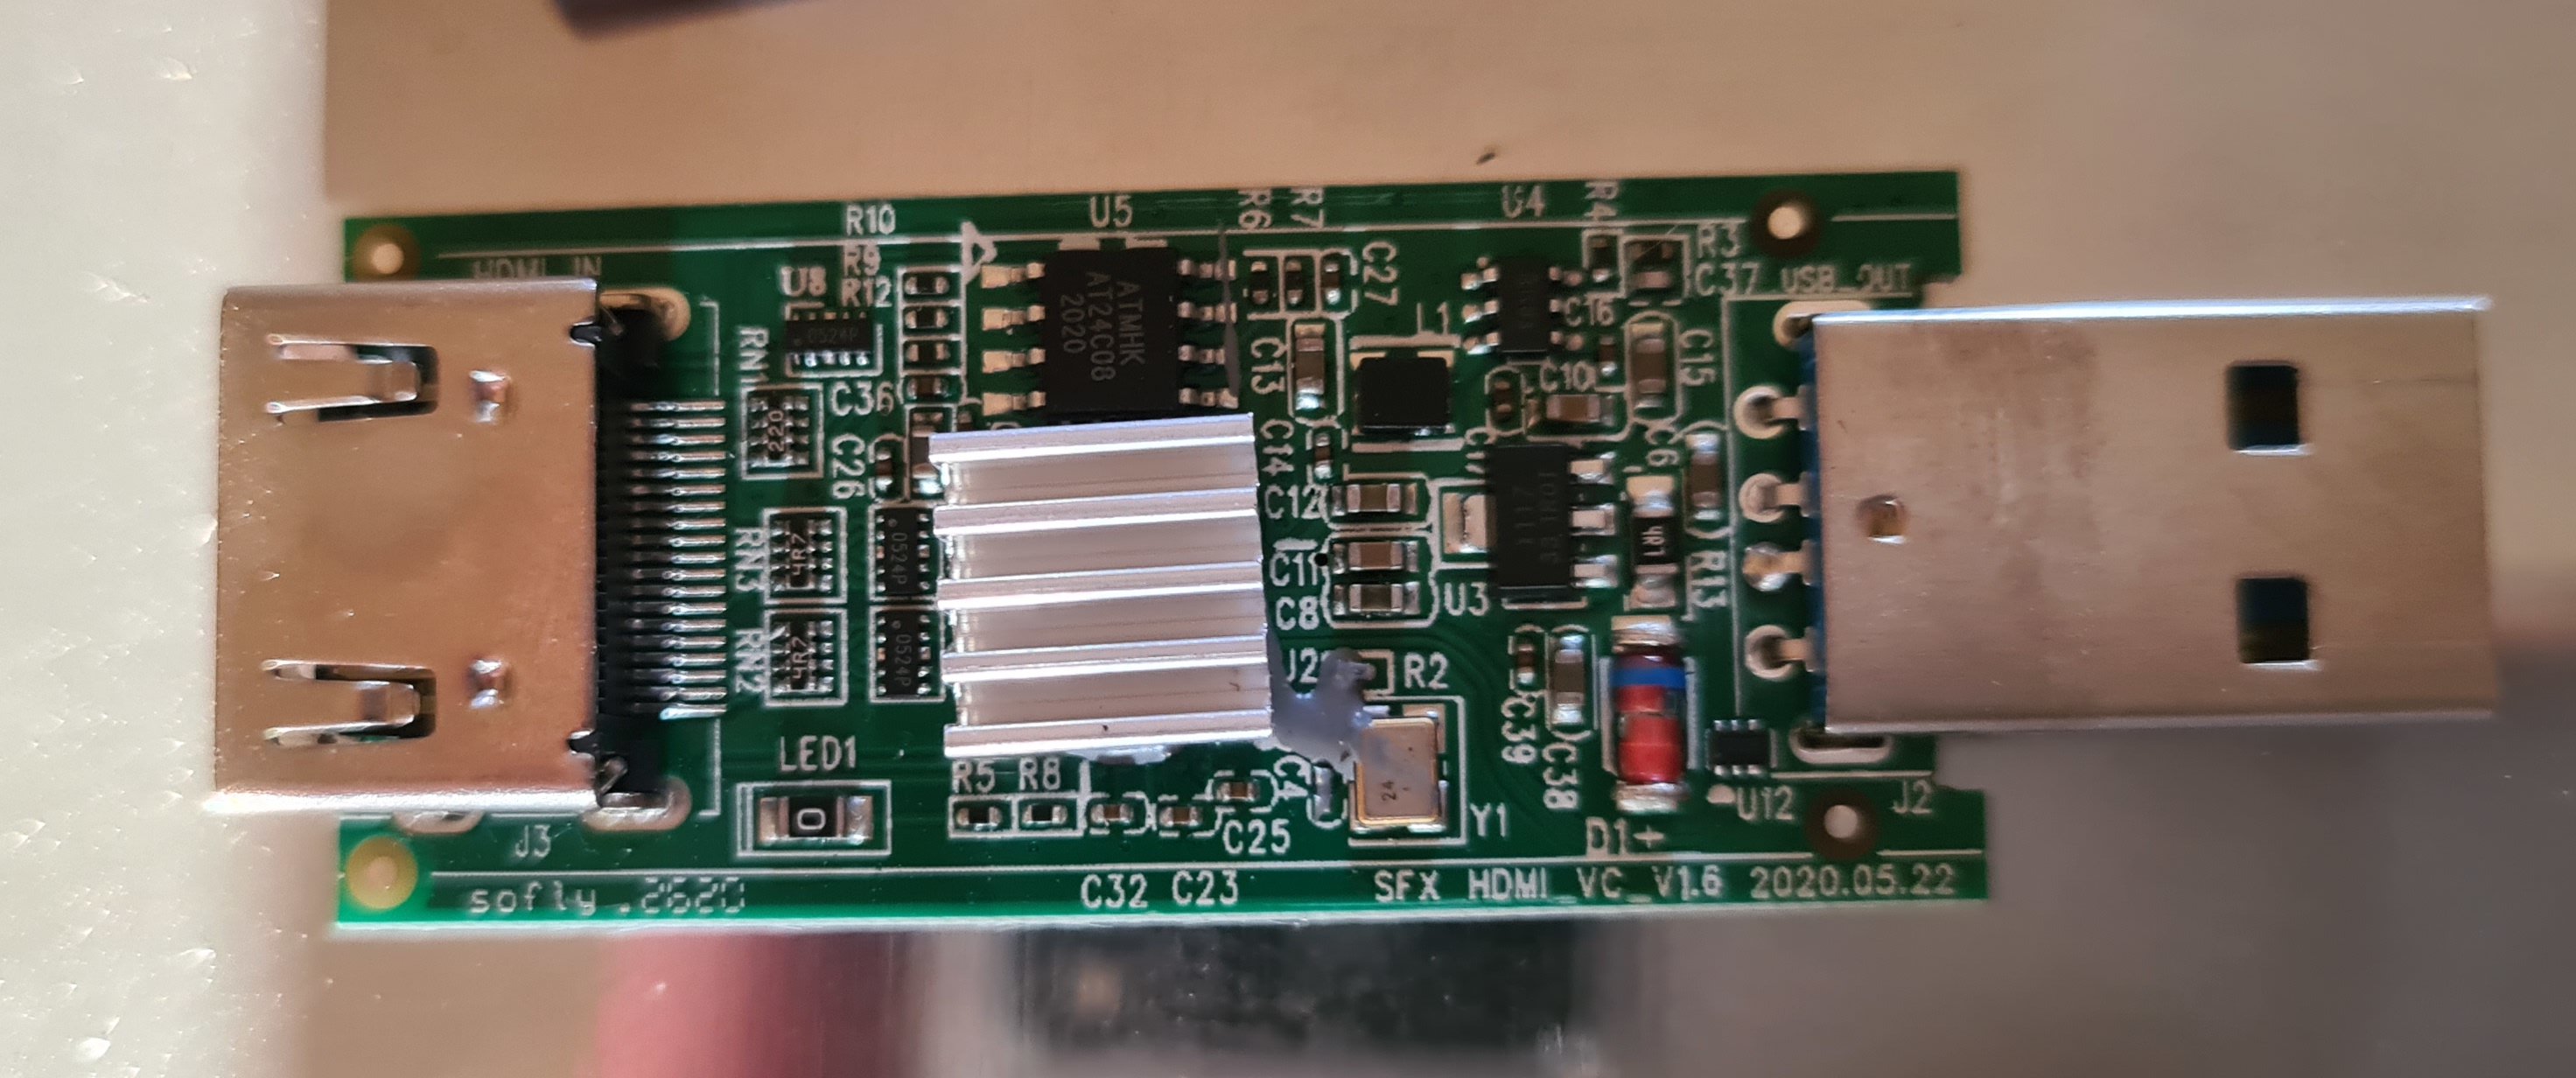 The PCB of the dongle. It has the marking "SFX_HDMI_VC_1.6" and a large heat-sinked chip.